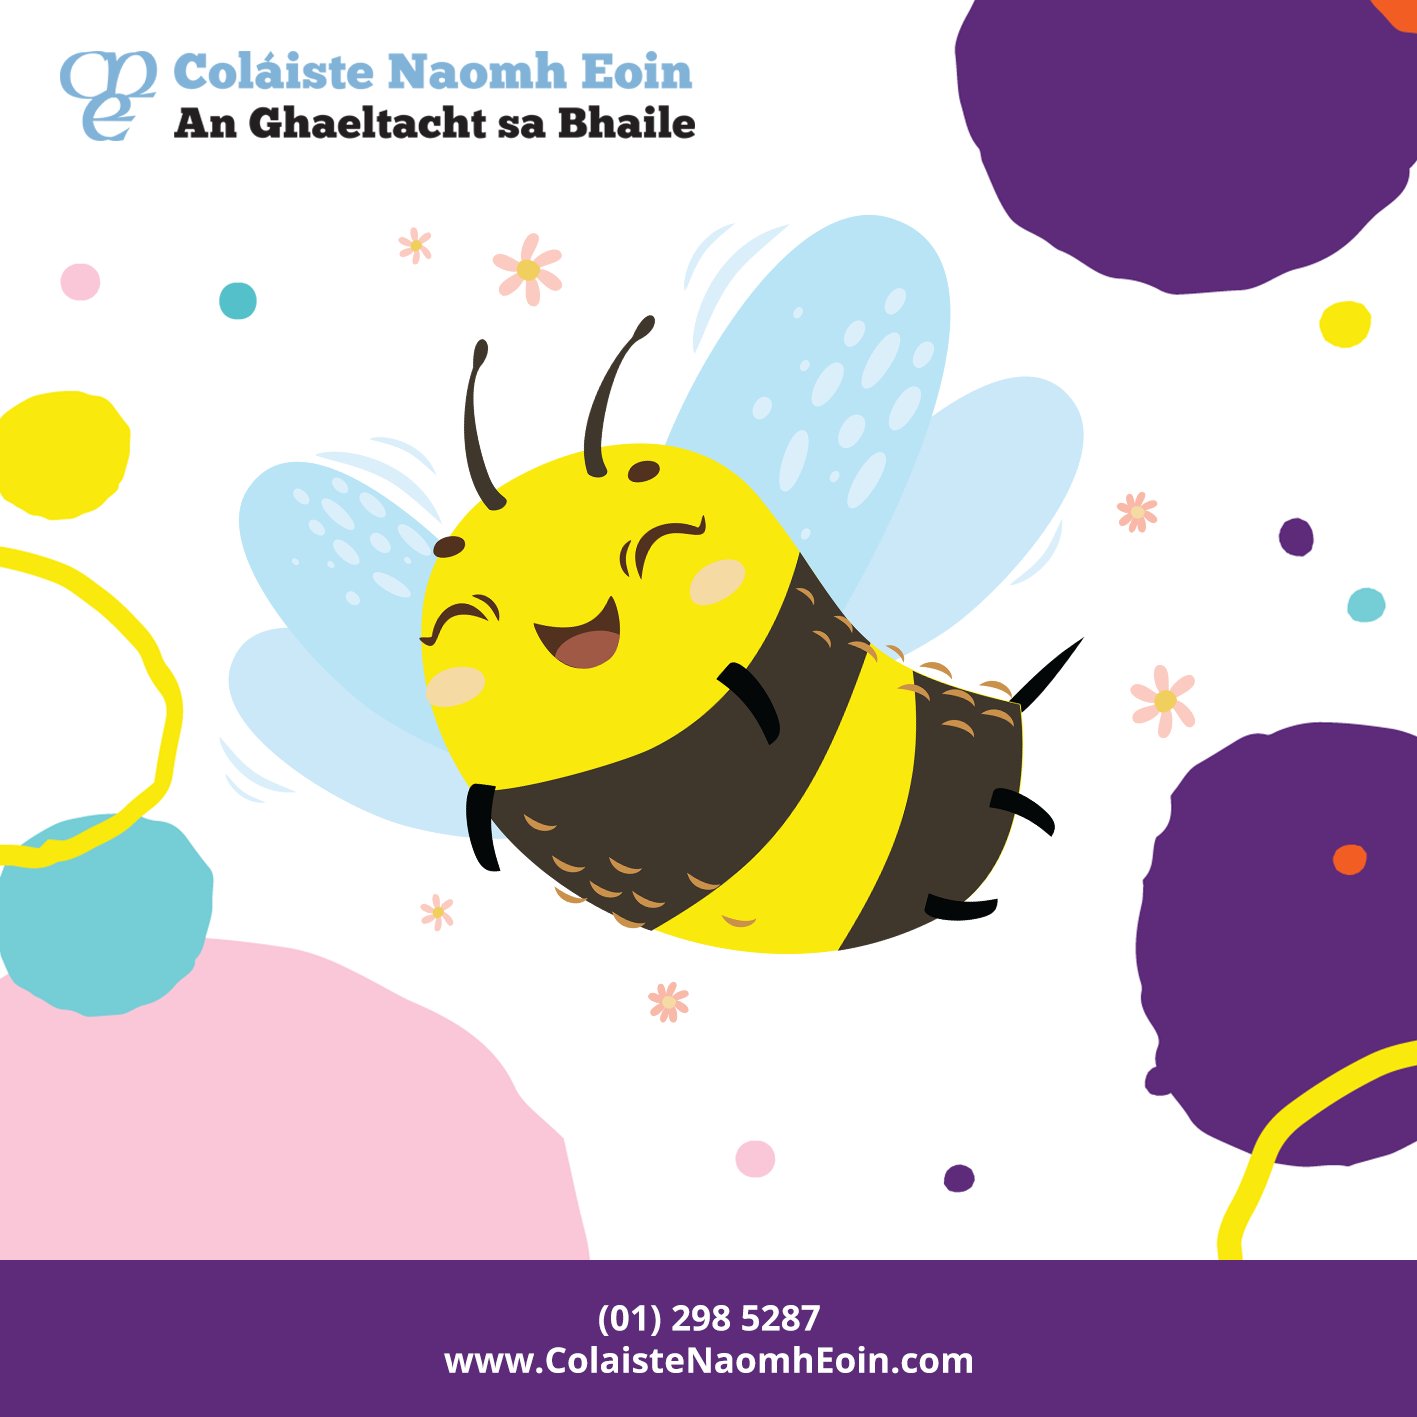 Colaiste Naomh Eoin Today Is World Bee Day Without Bees Our Entire Food Chain Could Potentially Collapse Please Bee Kind Follow The Advice In This Article To See How